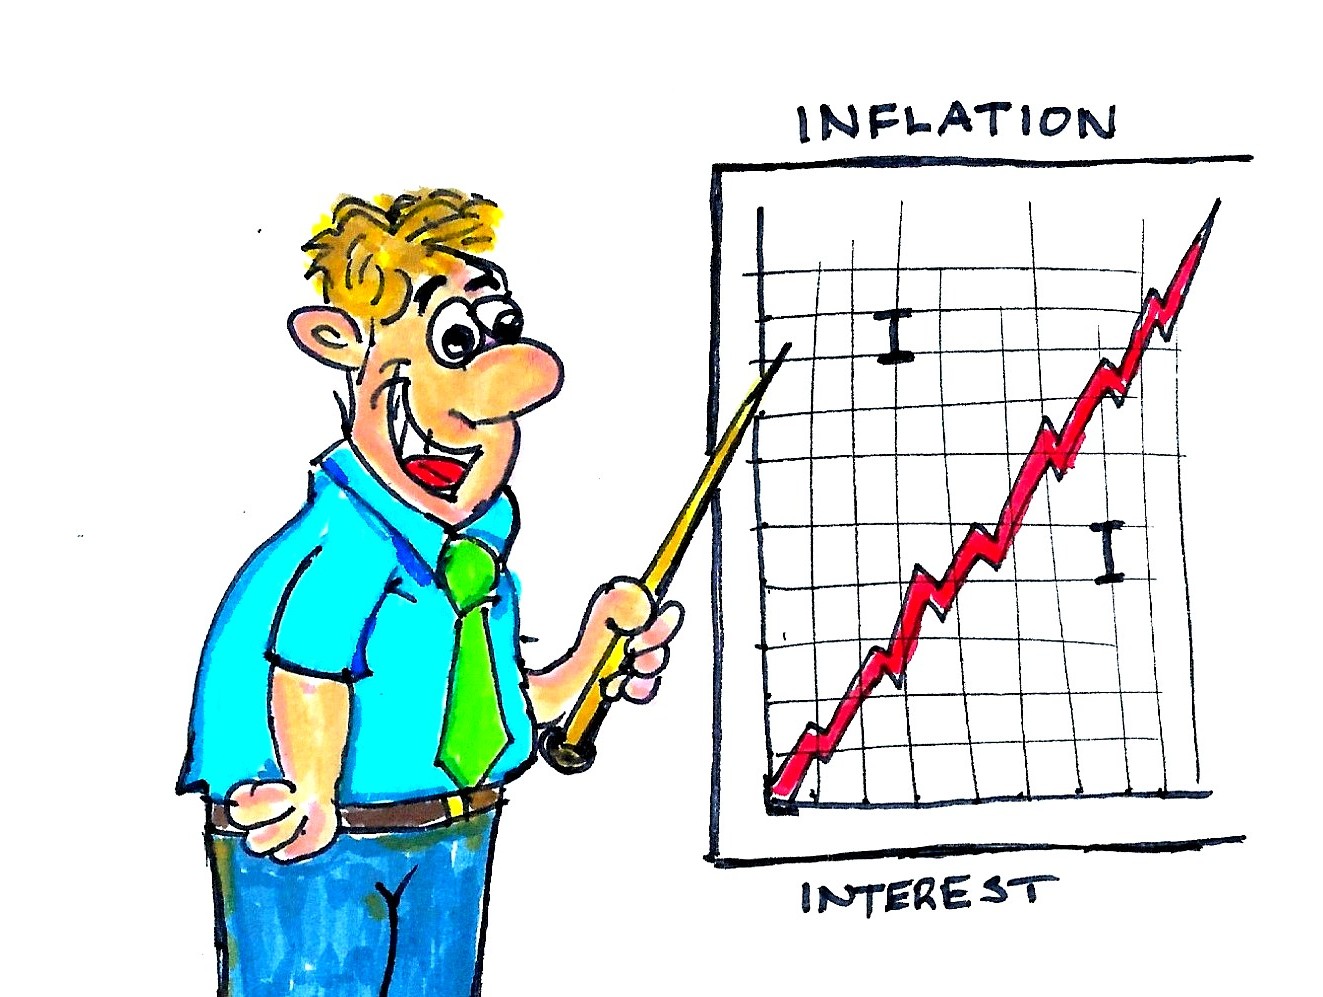 THERE ARE TWO I'S IN INFLATION!